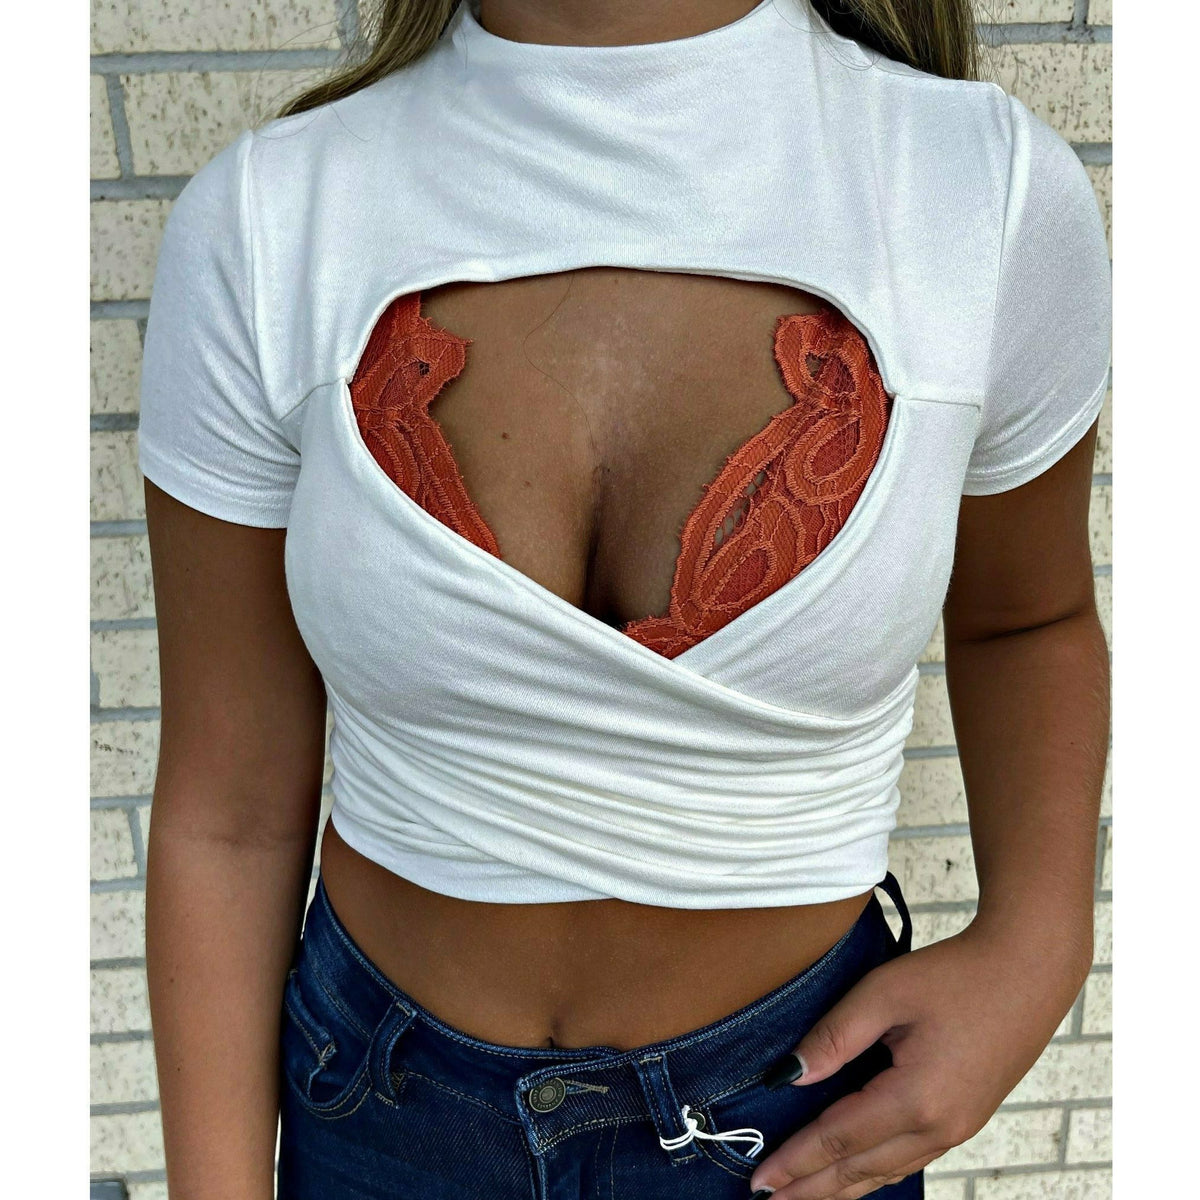 Mkayla Sexy Top ( 2 colors)